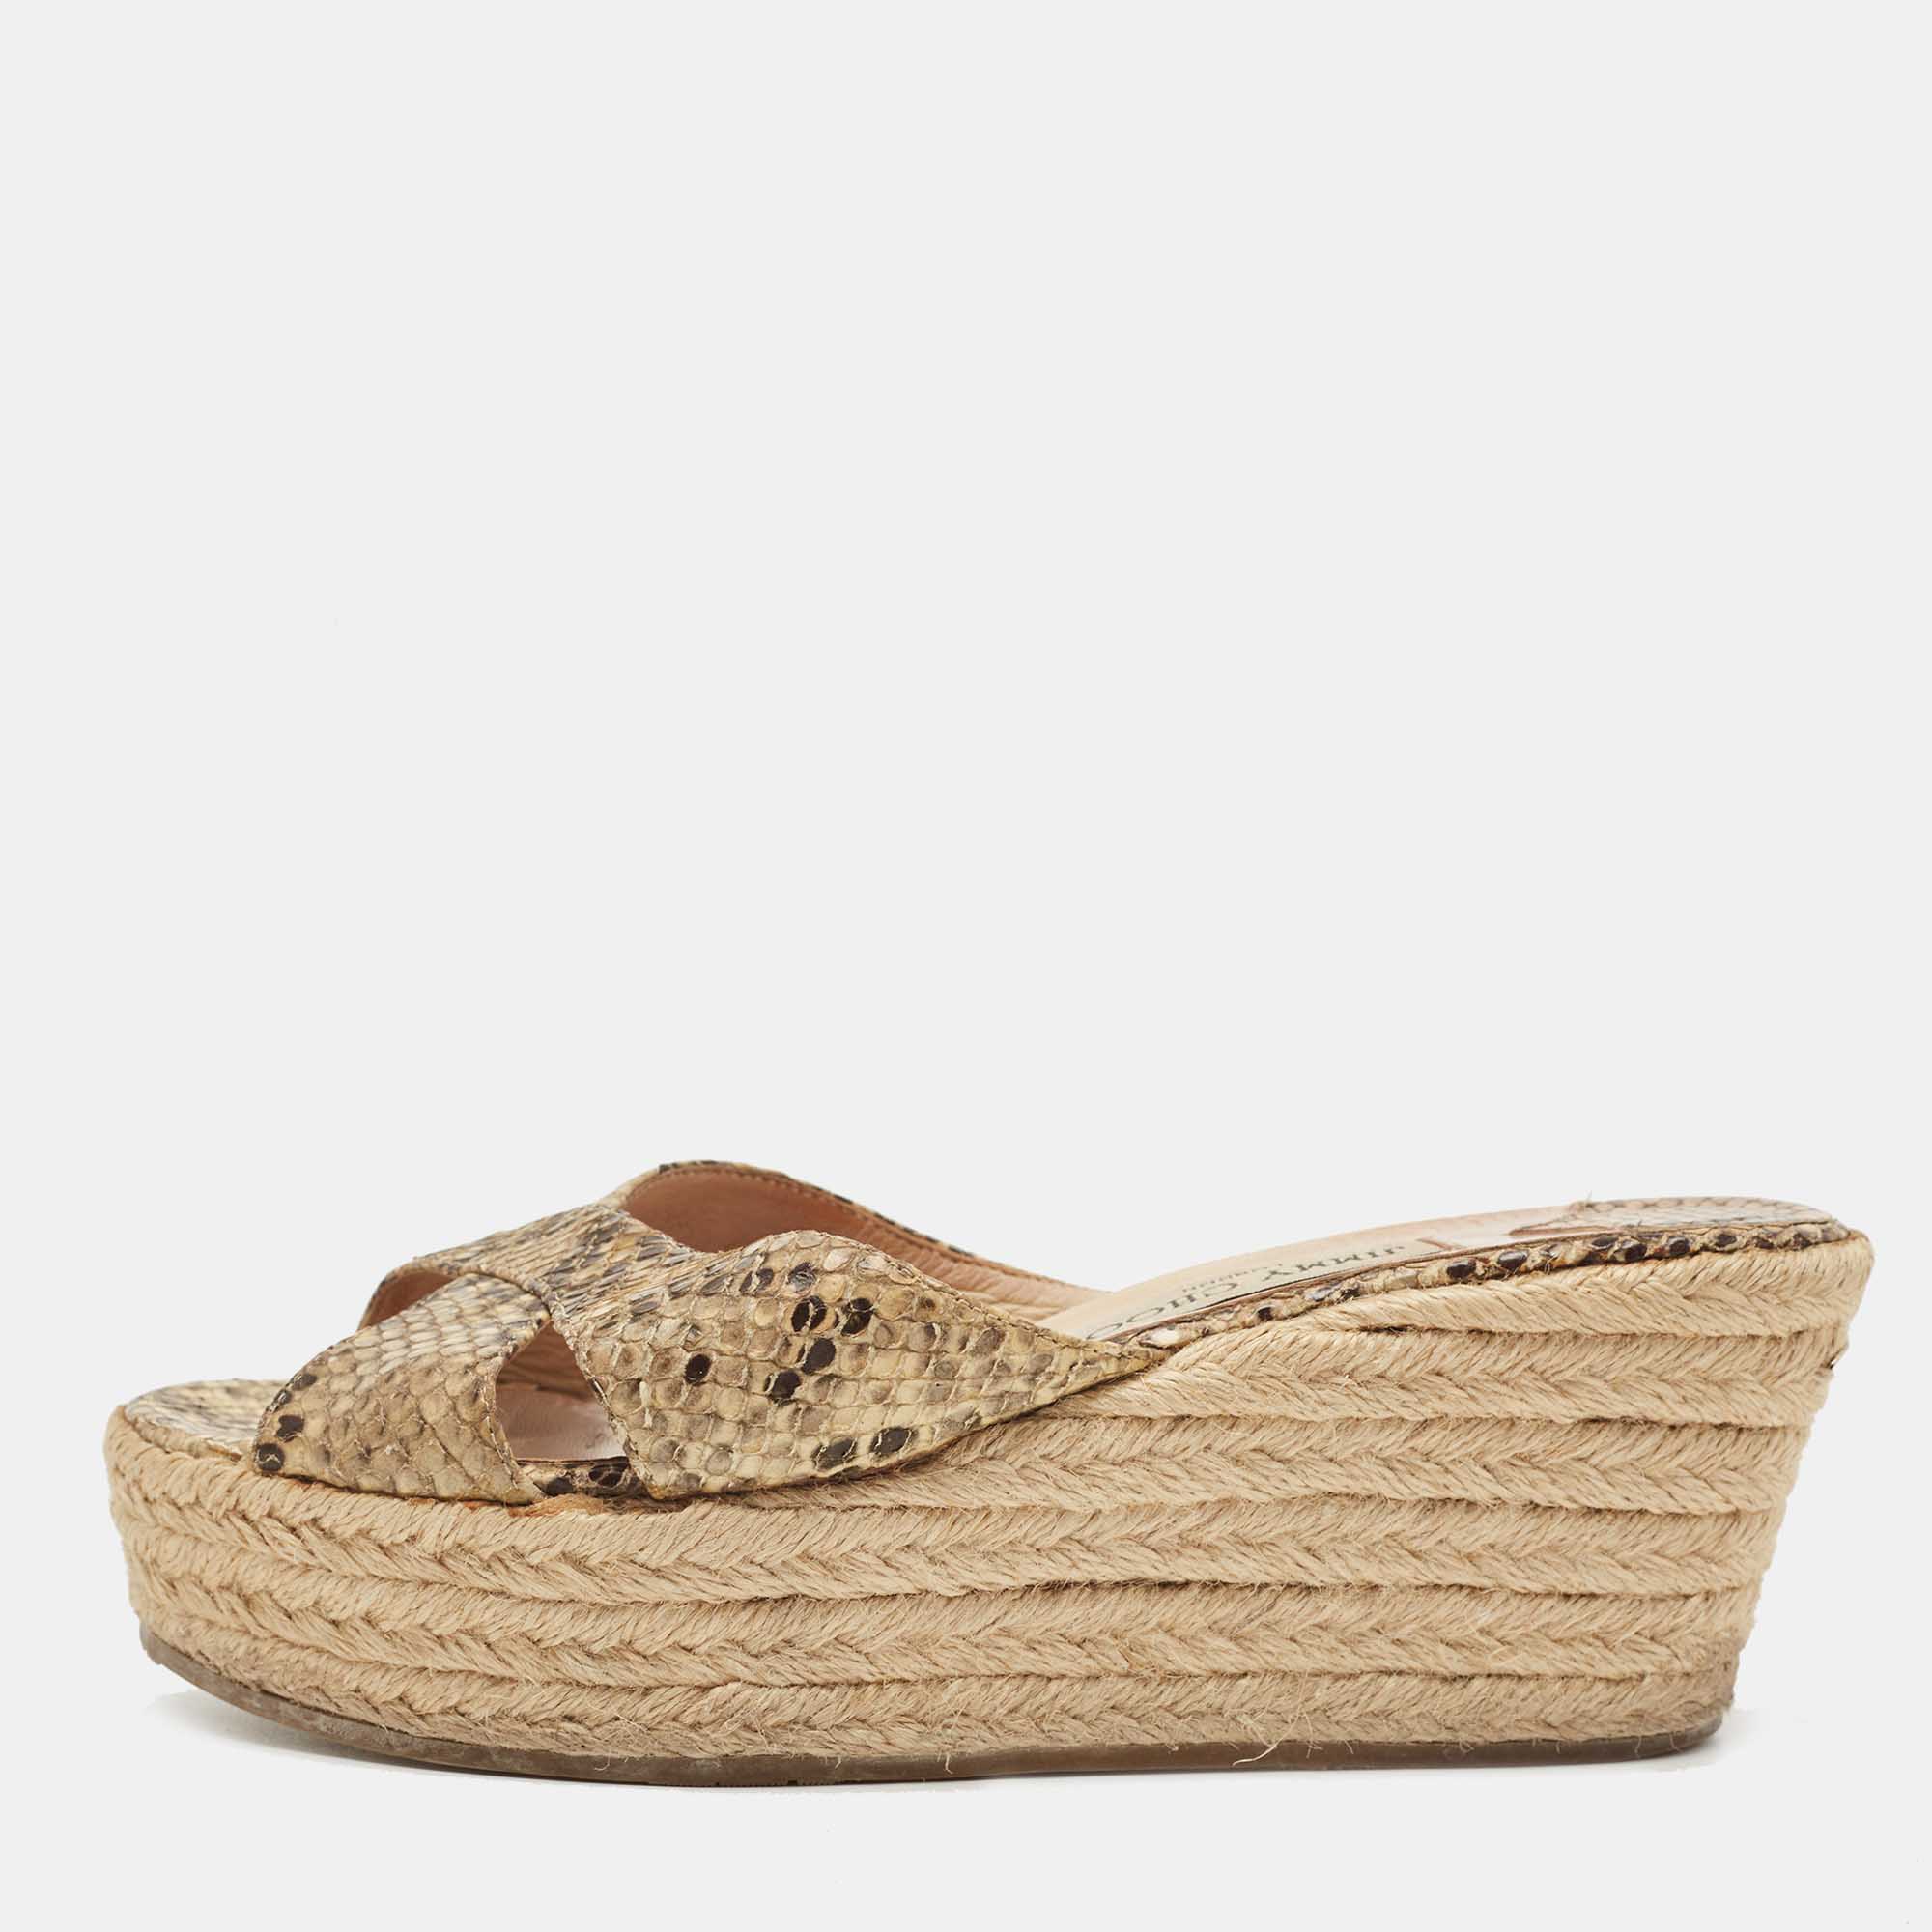 Pre-owned Jimmy Choo Beige/brown Python Embossed Leather Phyllis Wedge Espadrille Slide Sandals Size 38